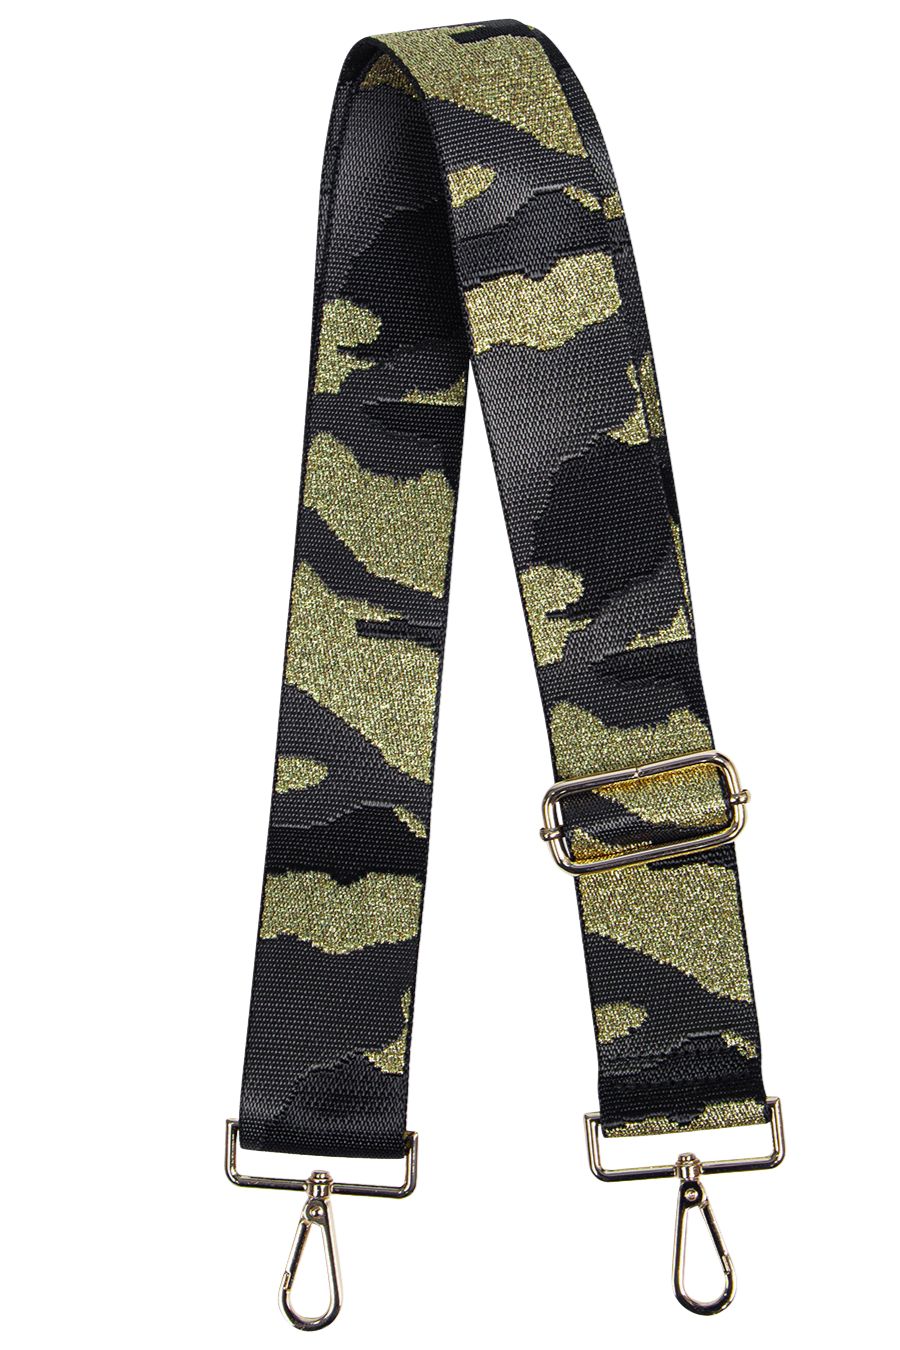 black and gold glitter camo print bag strap for crossbody bags, adjustable, with gold hardware